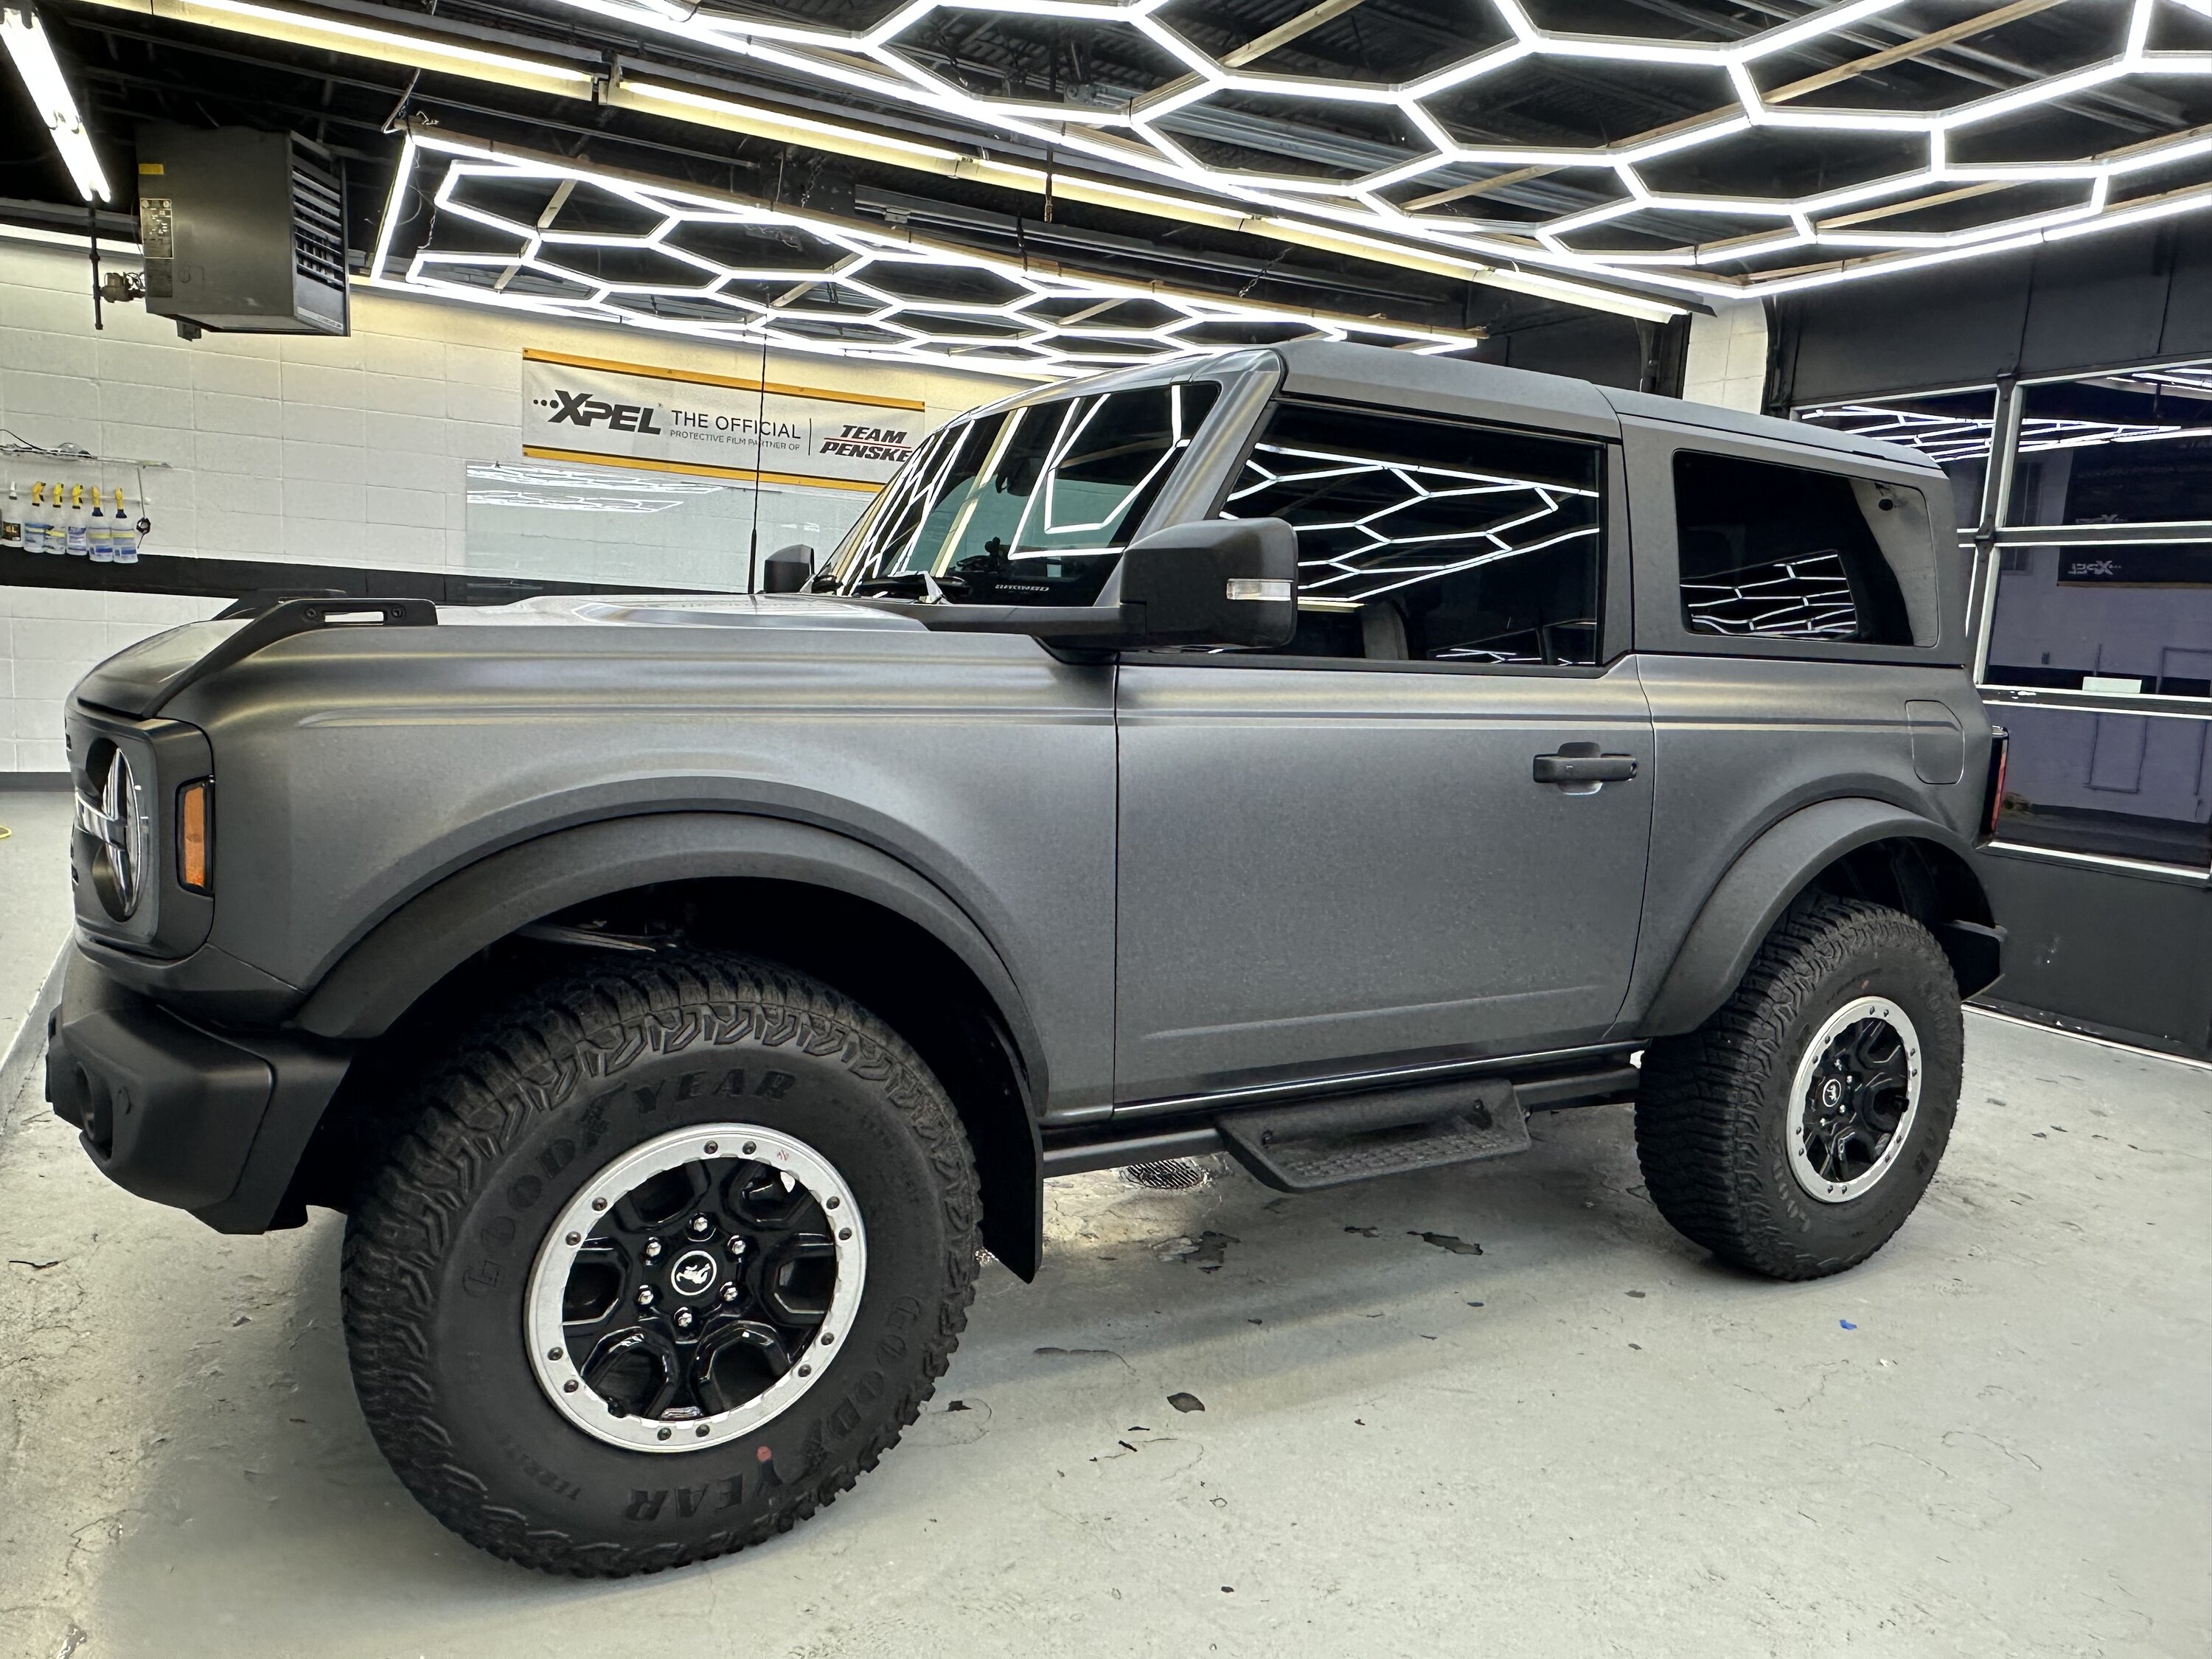 Ford Bronco Vinyl wrap on your Bronco - experiences / price? Stealth LH